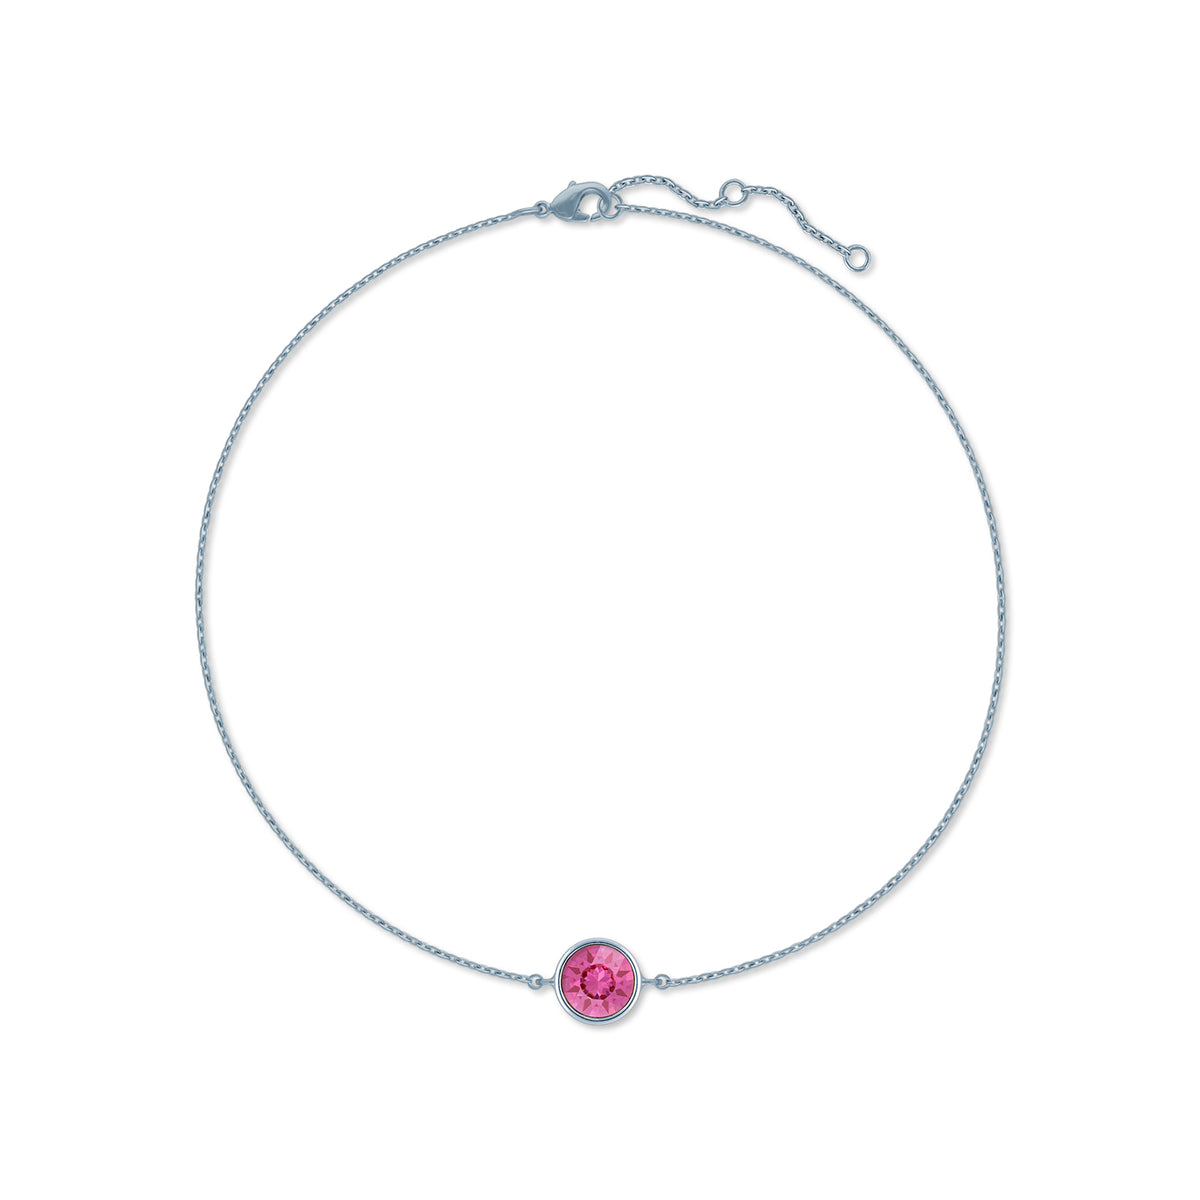 Harley Chain Bracelet with Pink Rose Round Crystals from Swarovski Silver Toned Rhodium Plated - Ed Heart